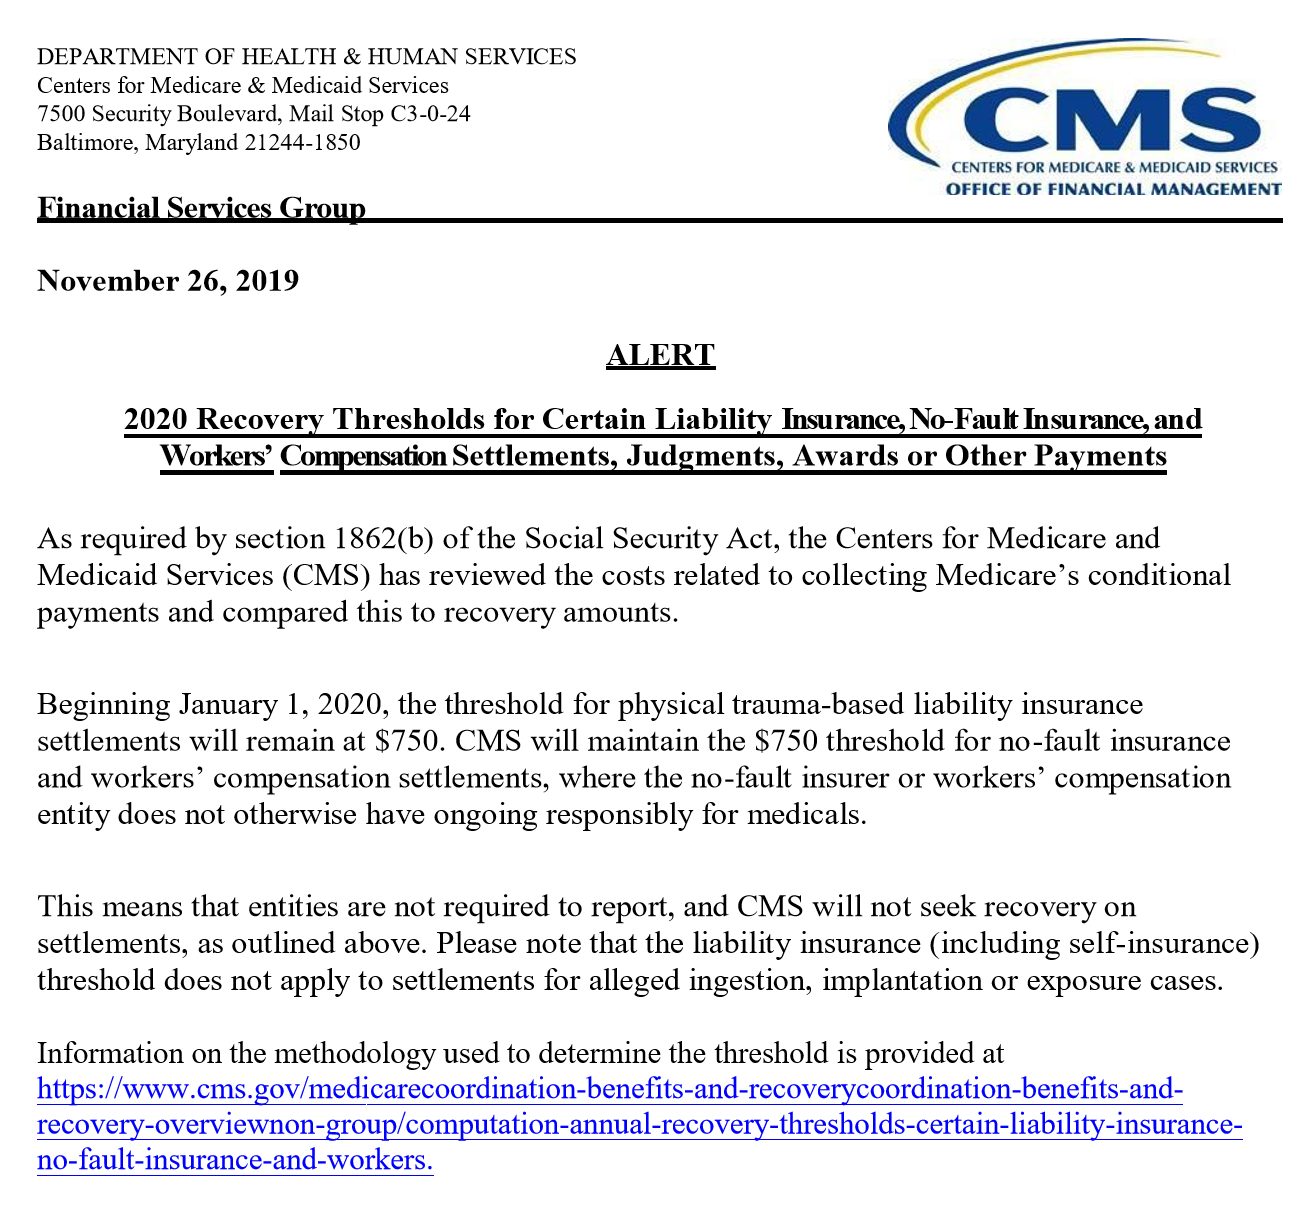 cms-retains-its-750-low-dollar-threshold-for-2020-visualize